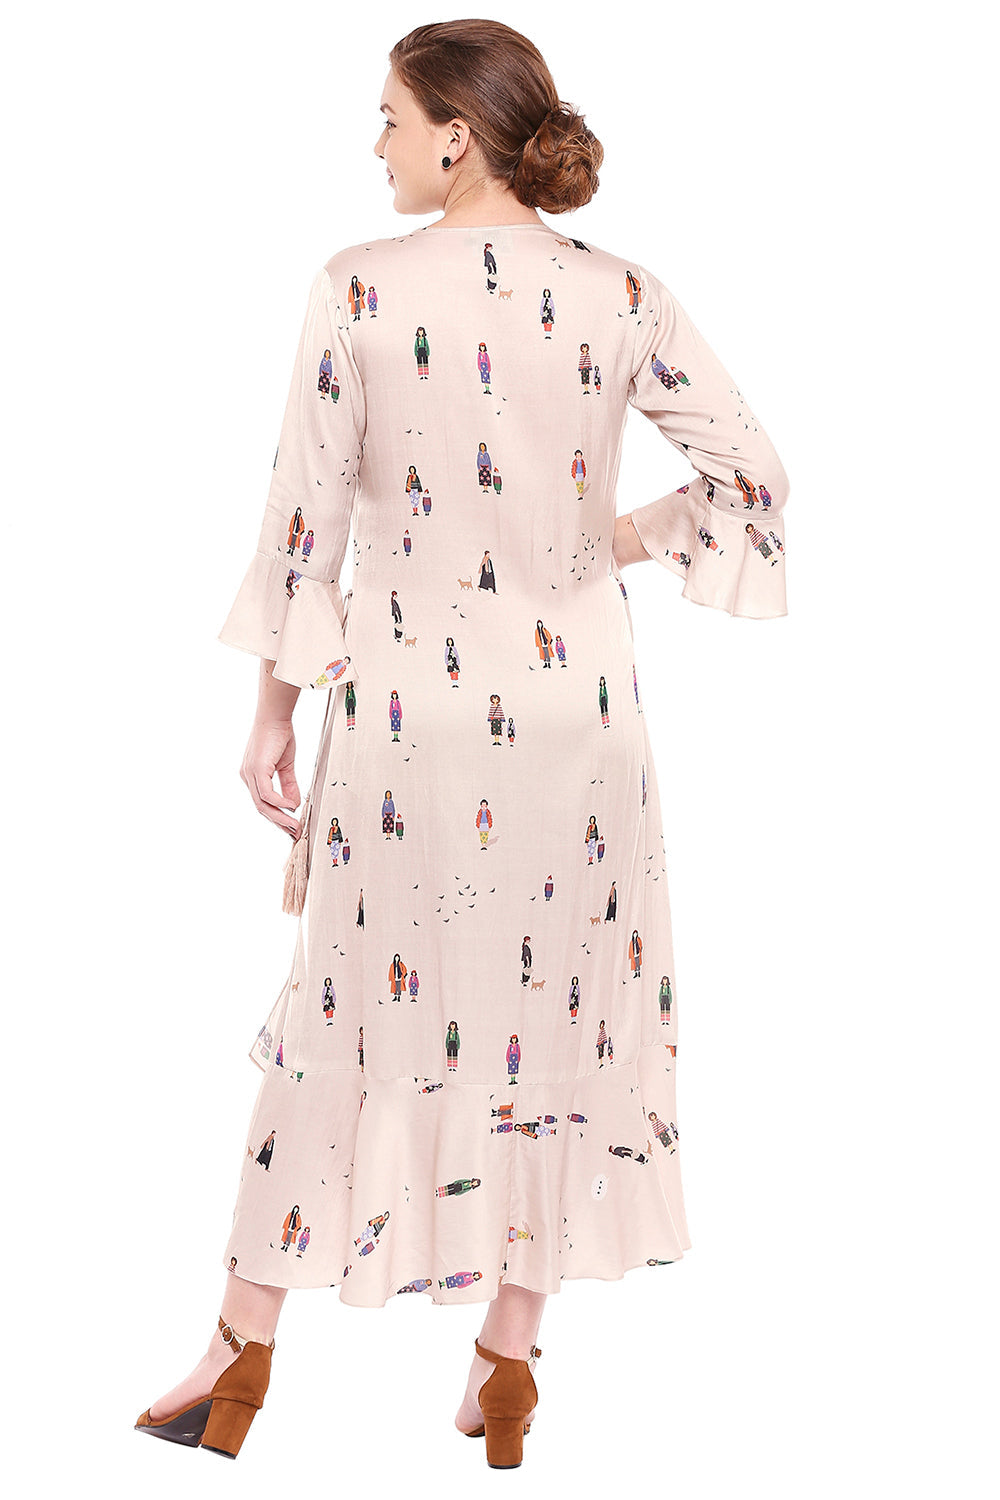 People Printed Overlap Dress With Frills